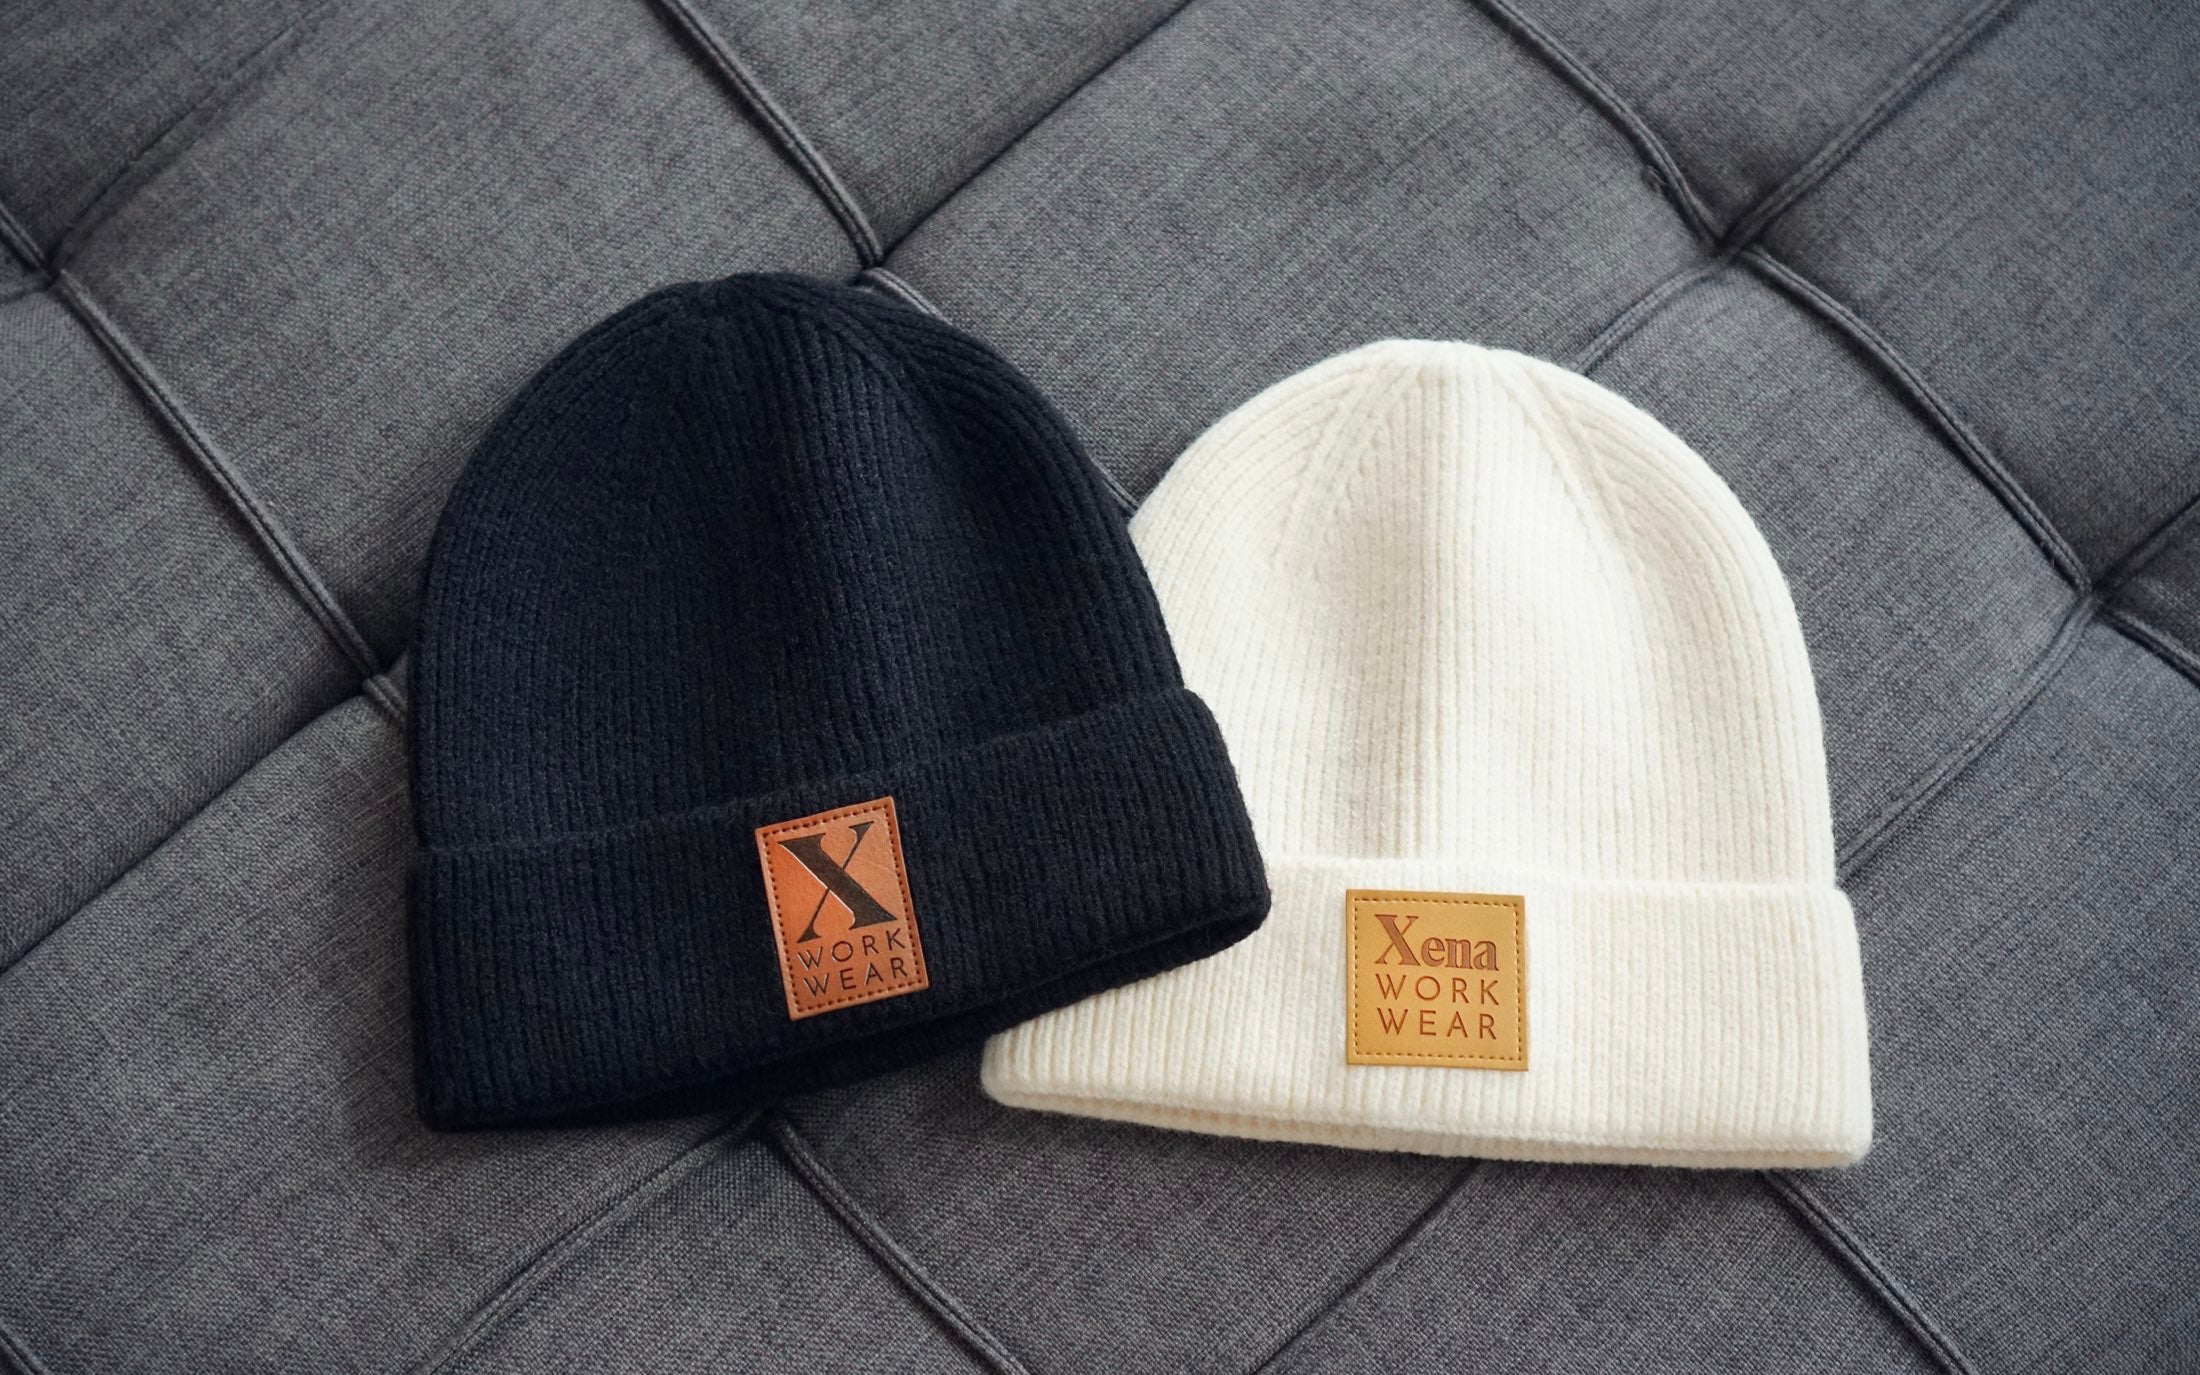 Xena Workwear Soft Wool Beanies in two Colors